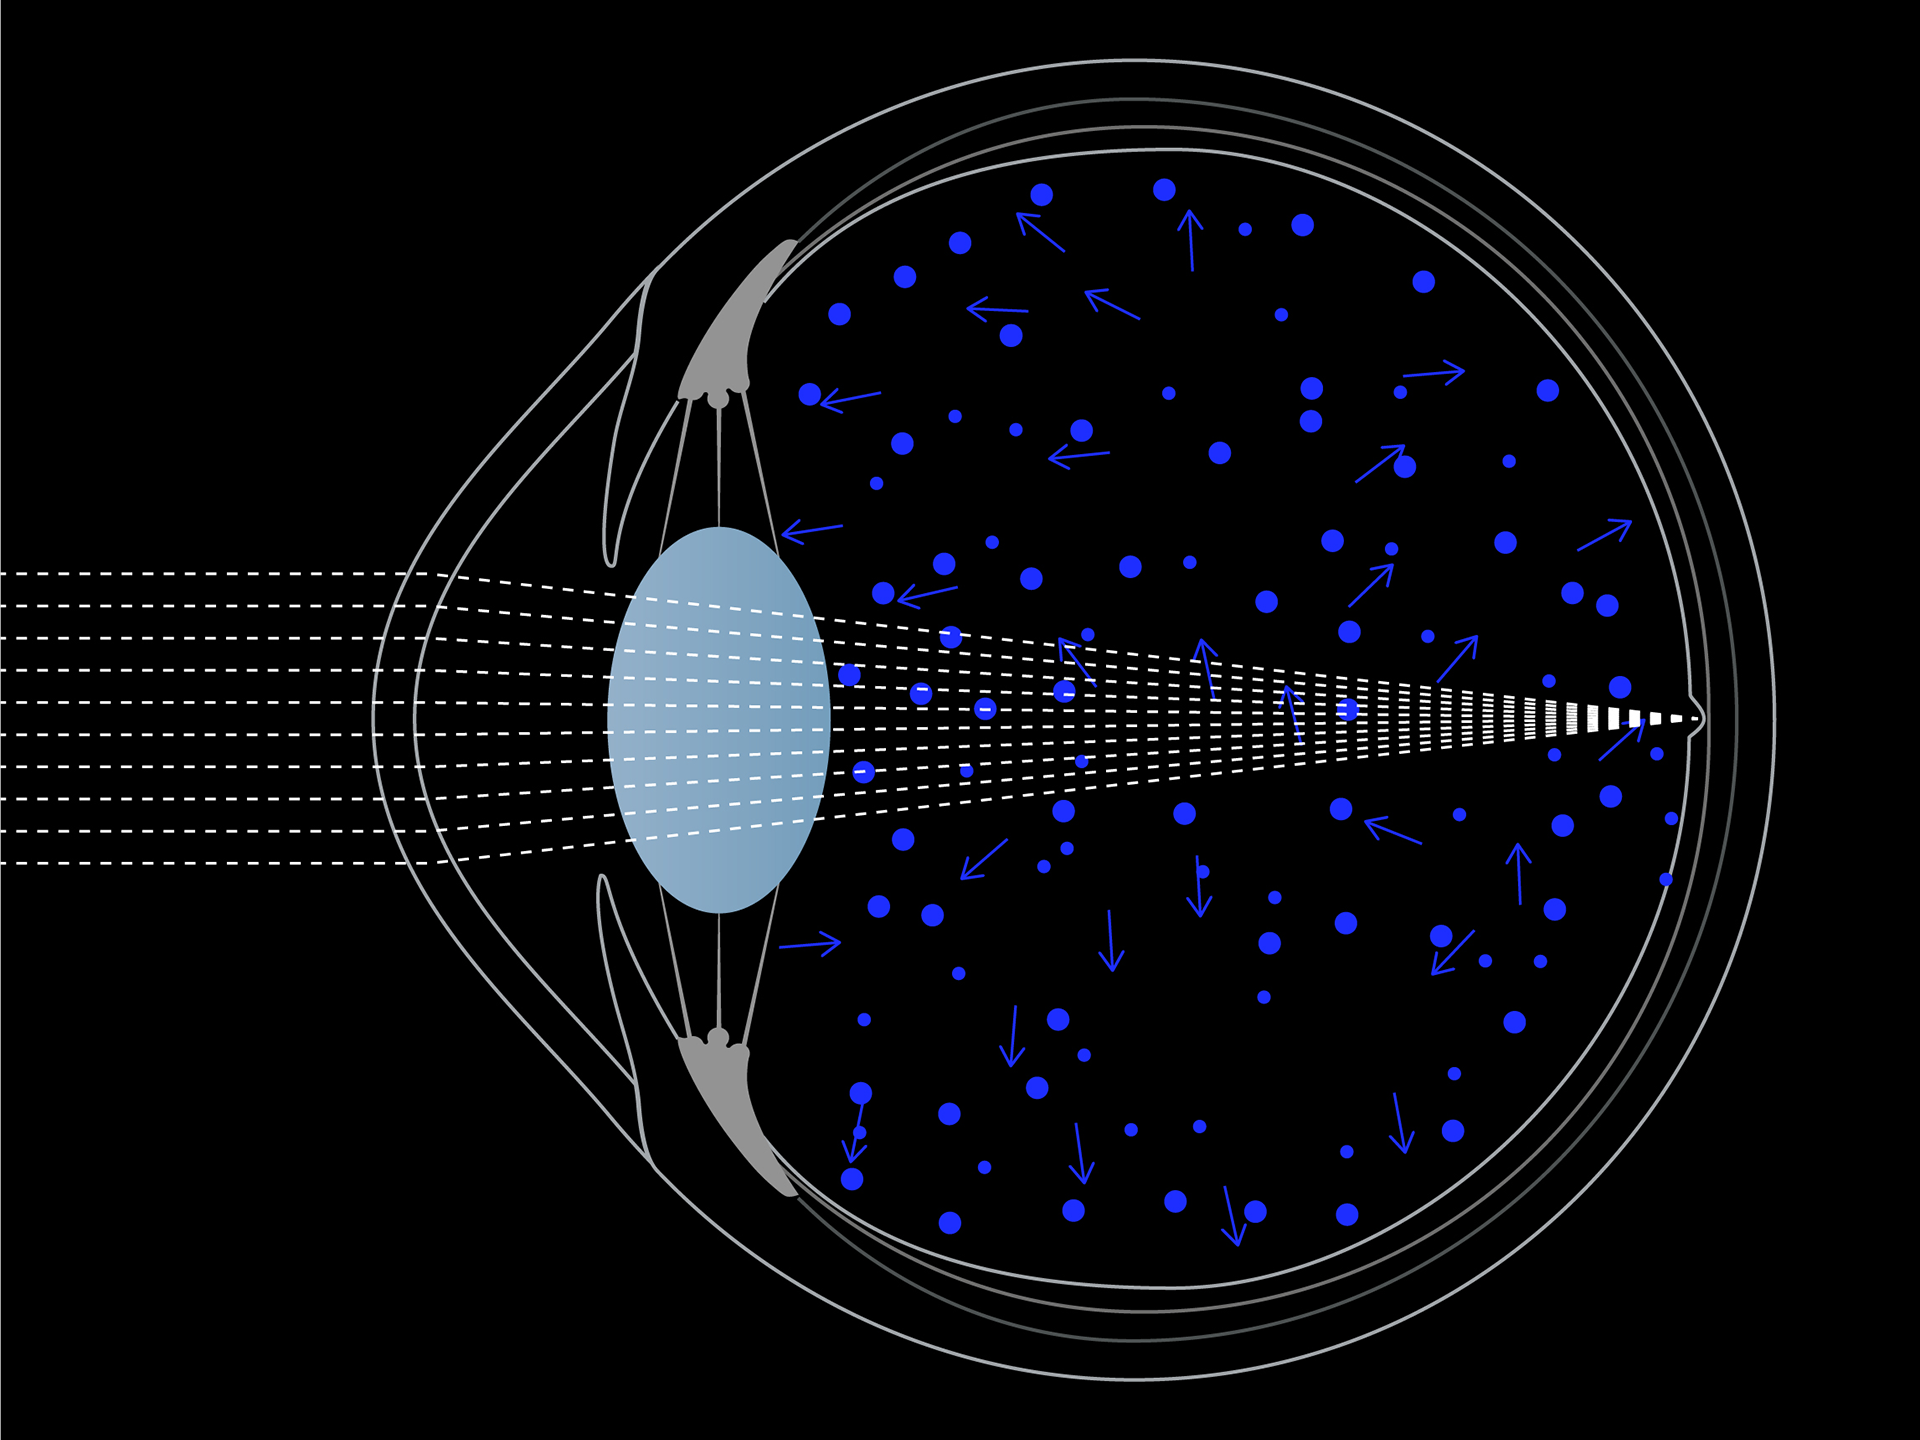 Schematic visualization of blue light scatter in the eye.